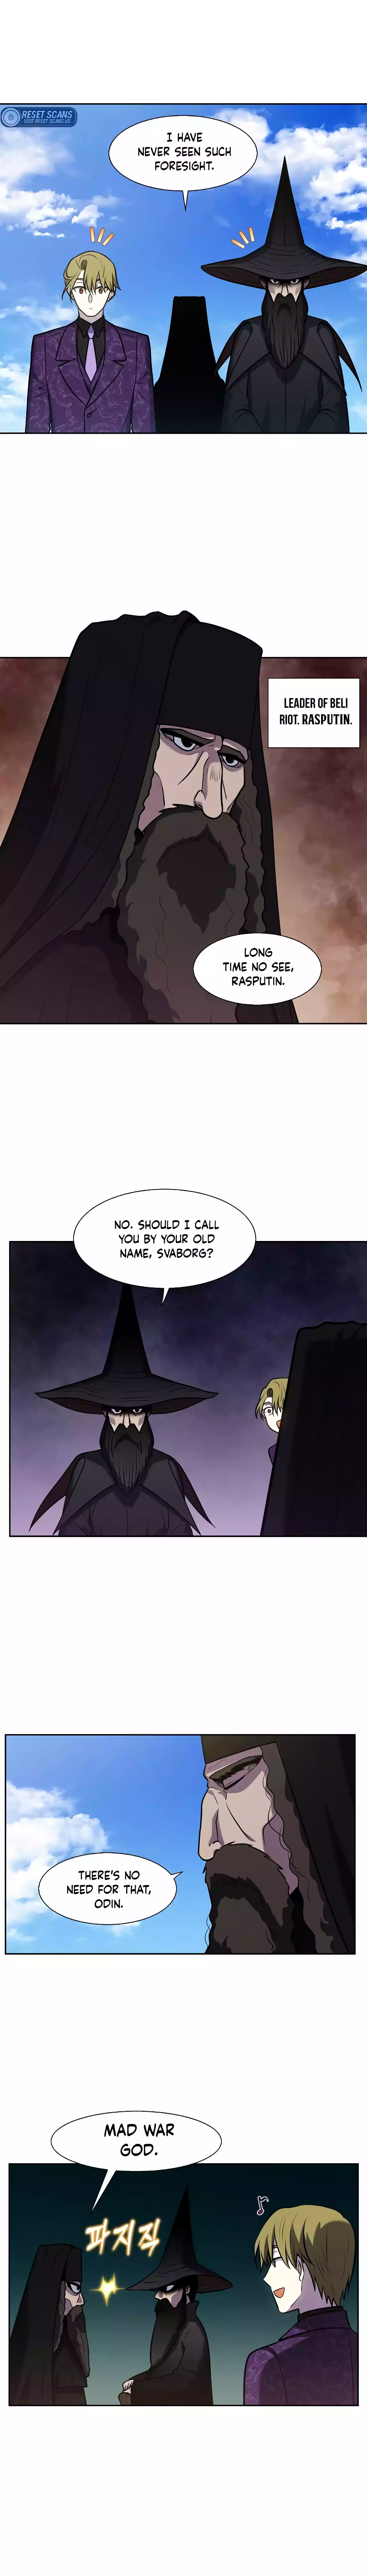 The Gamer - Chapter 494 Page 4